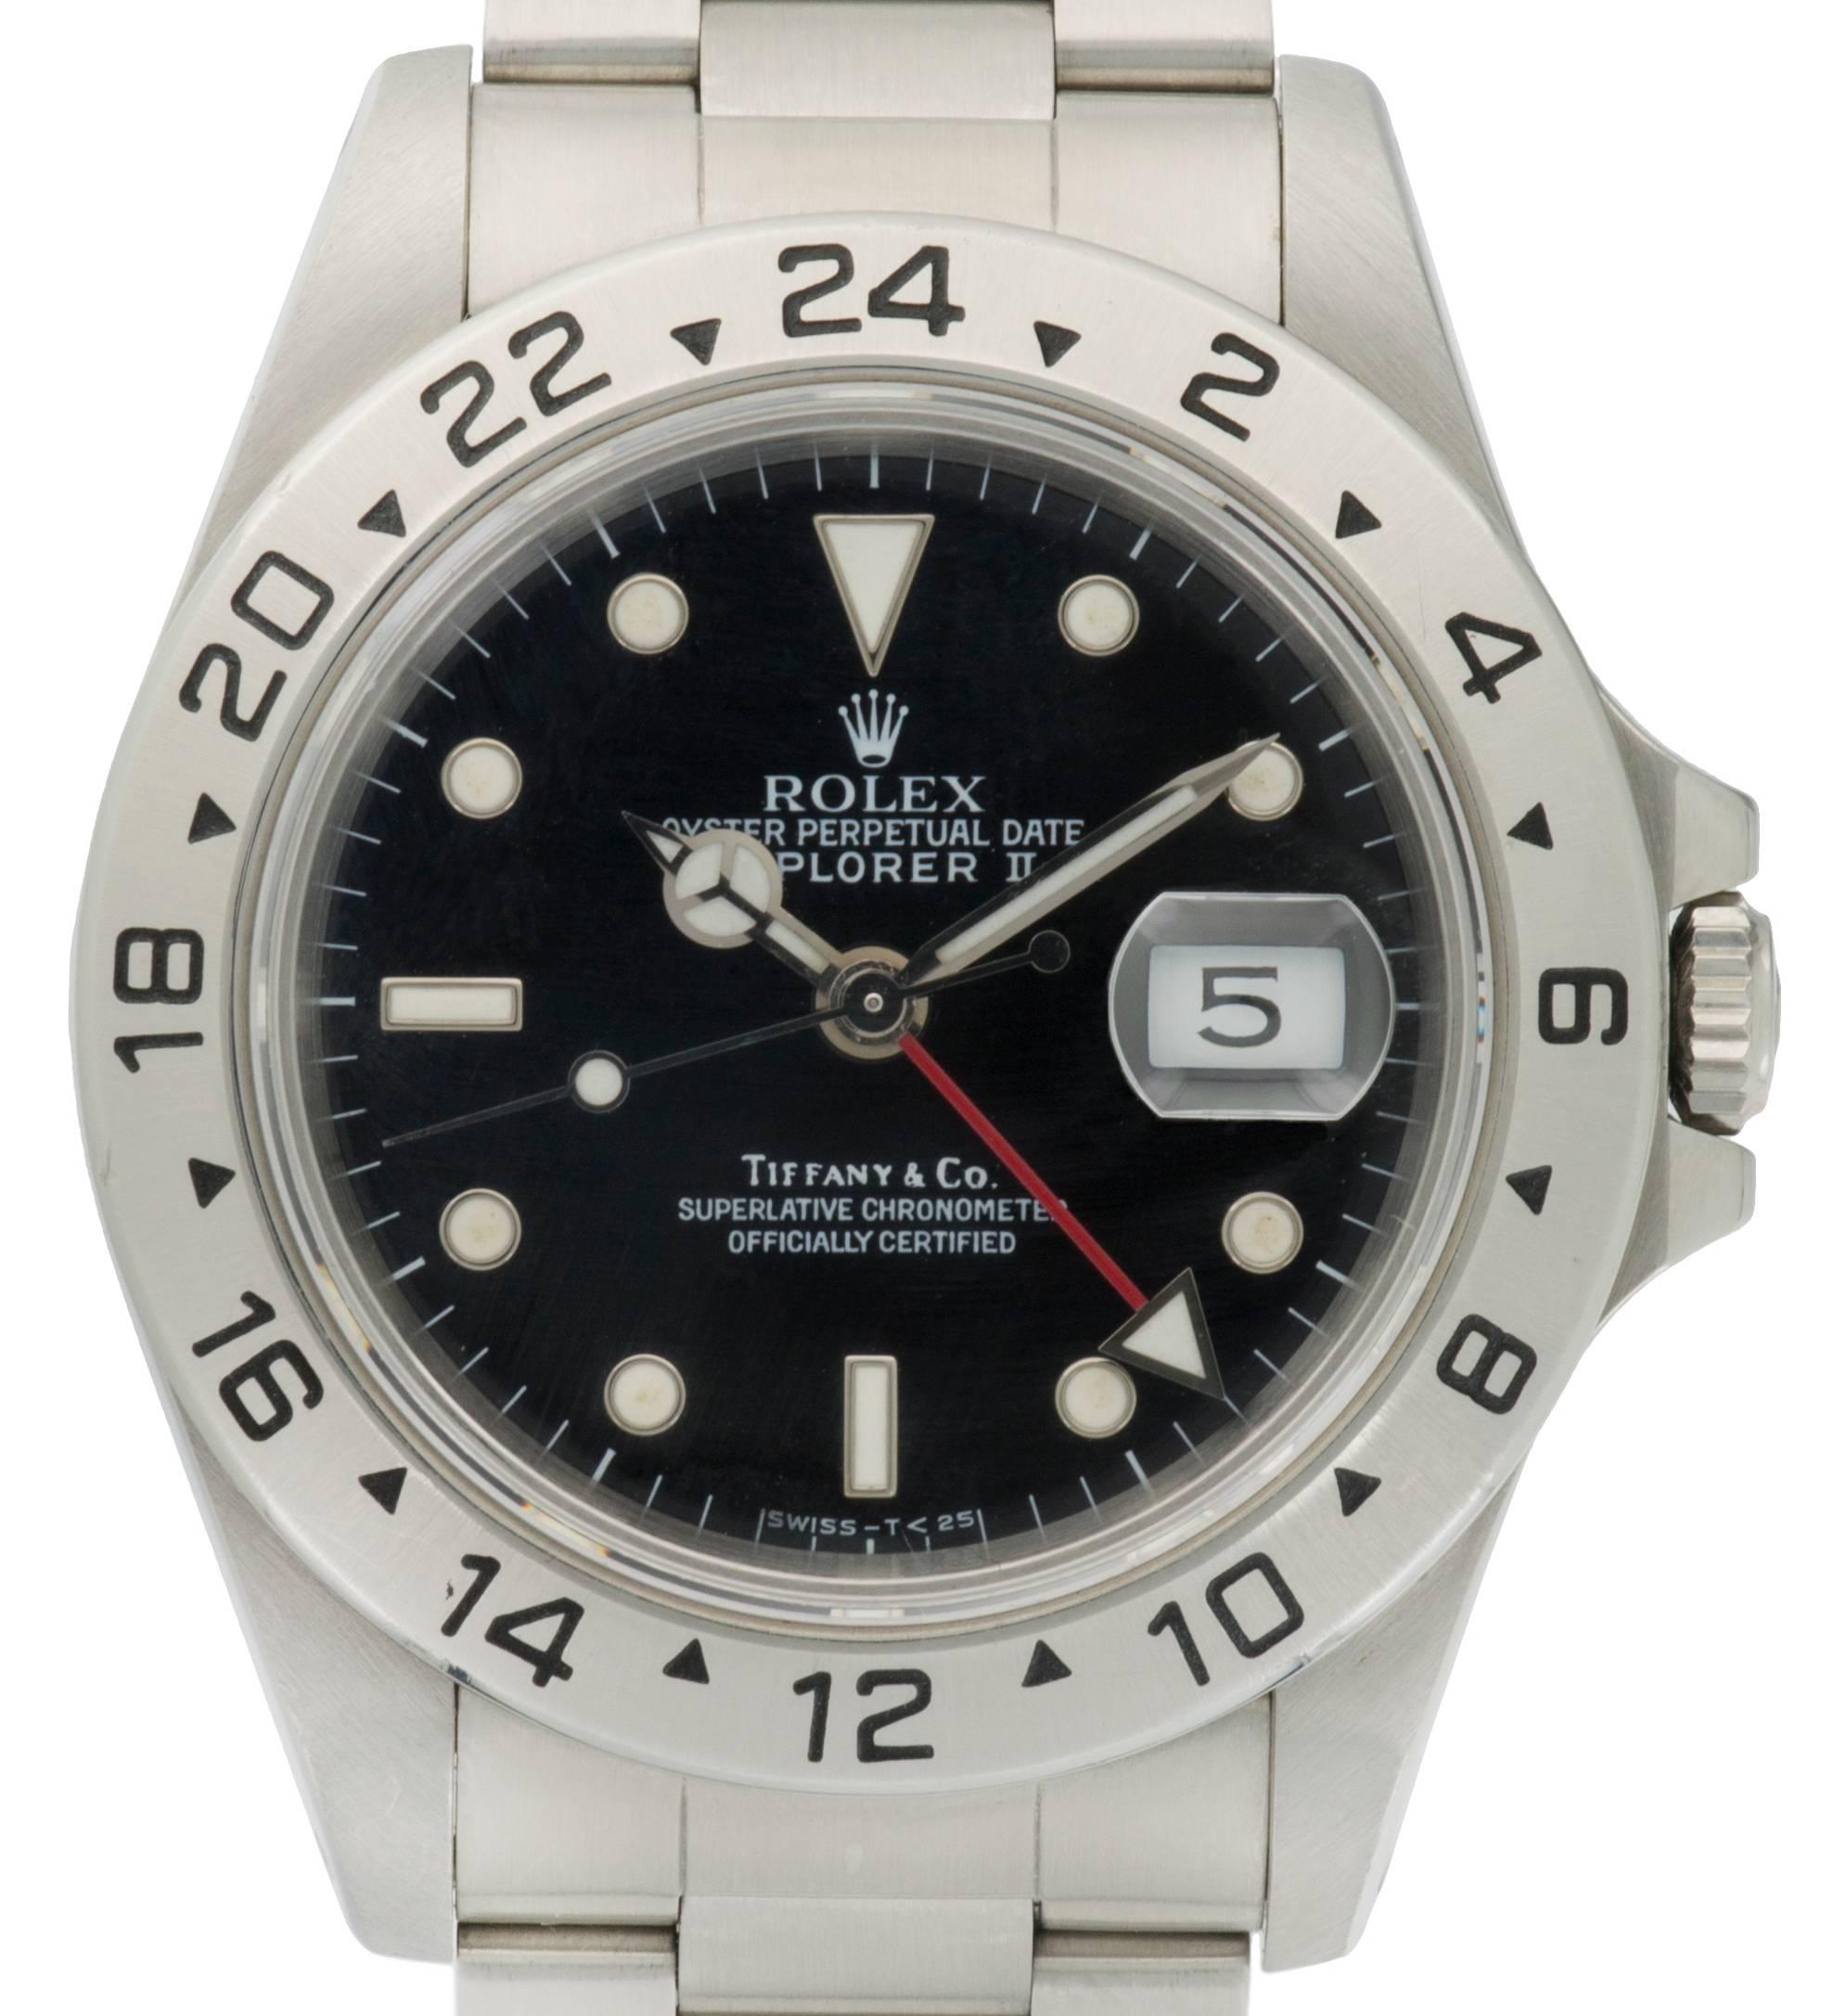 This Rolex Explorer II, ref. 16570 was originally retailed by Tiffany & Co. in the early 1990s. Aside from a small knick at the edge of the bezel between 8 and 9 o'clock, this watch is in superb condition with a very tight bracelet, a beautiful